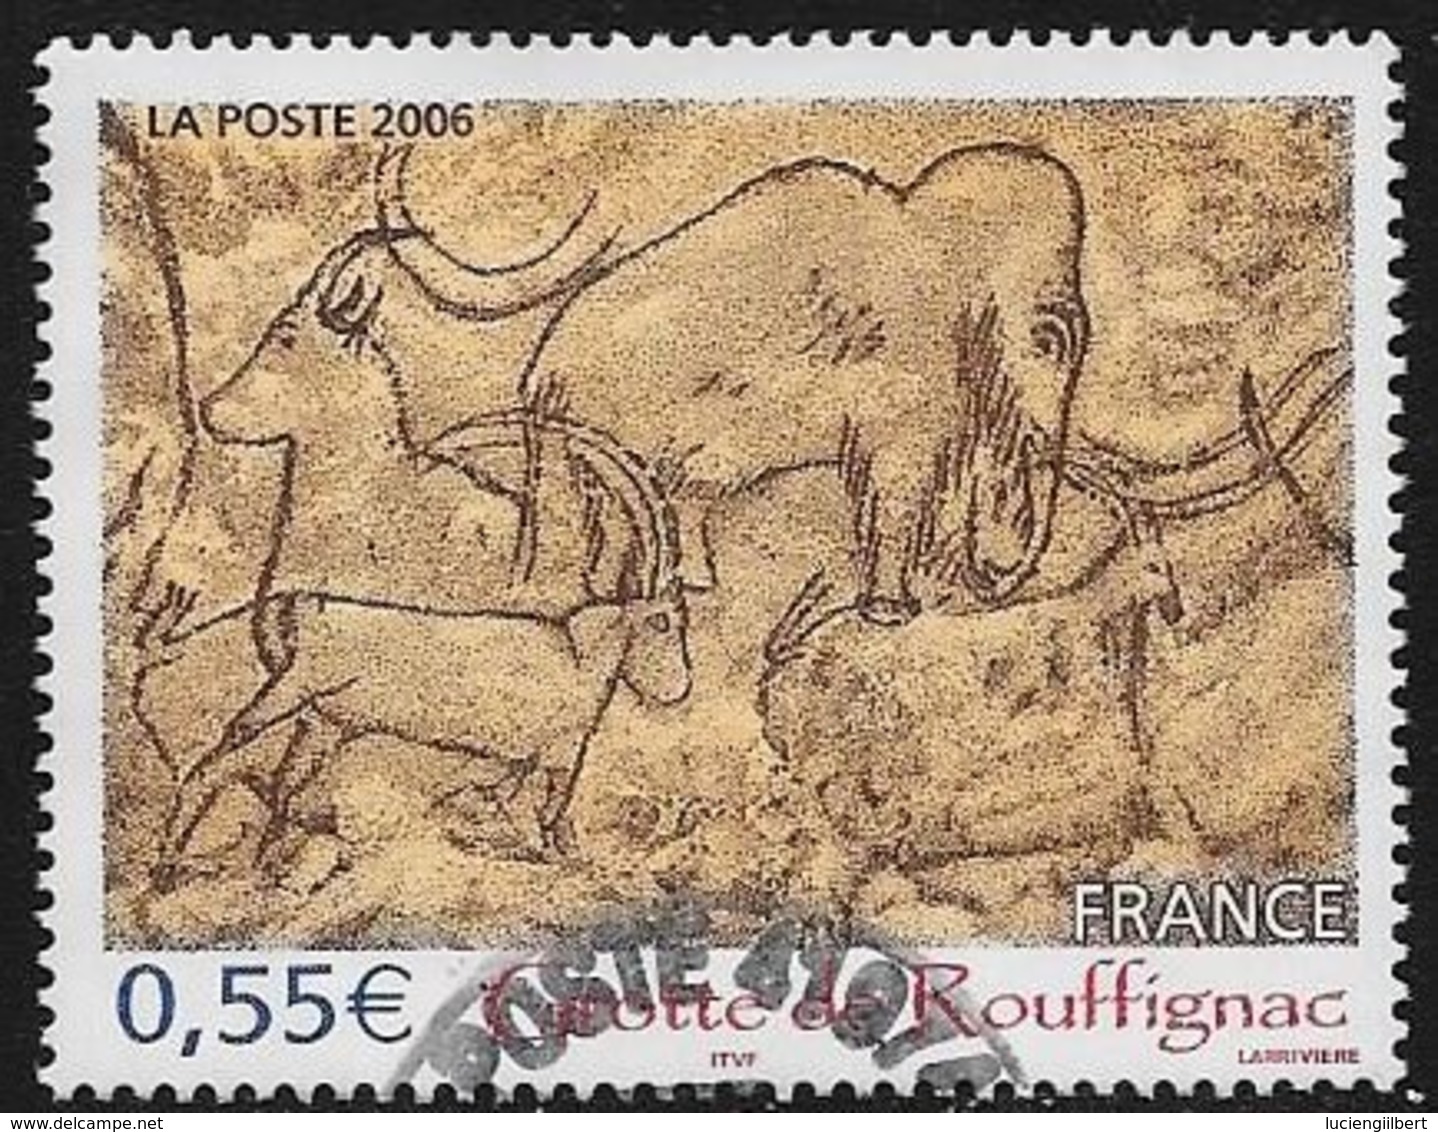 TIMBRE N° 3905   -    TABLEAU GORGES DE ROUFFIGNAC     - OBLITERE  -  2006  - - Used Stamps